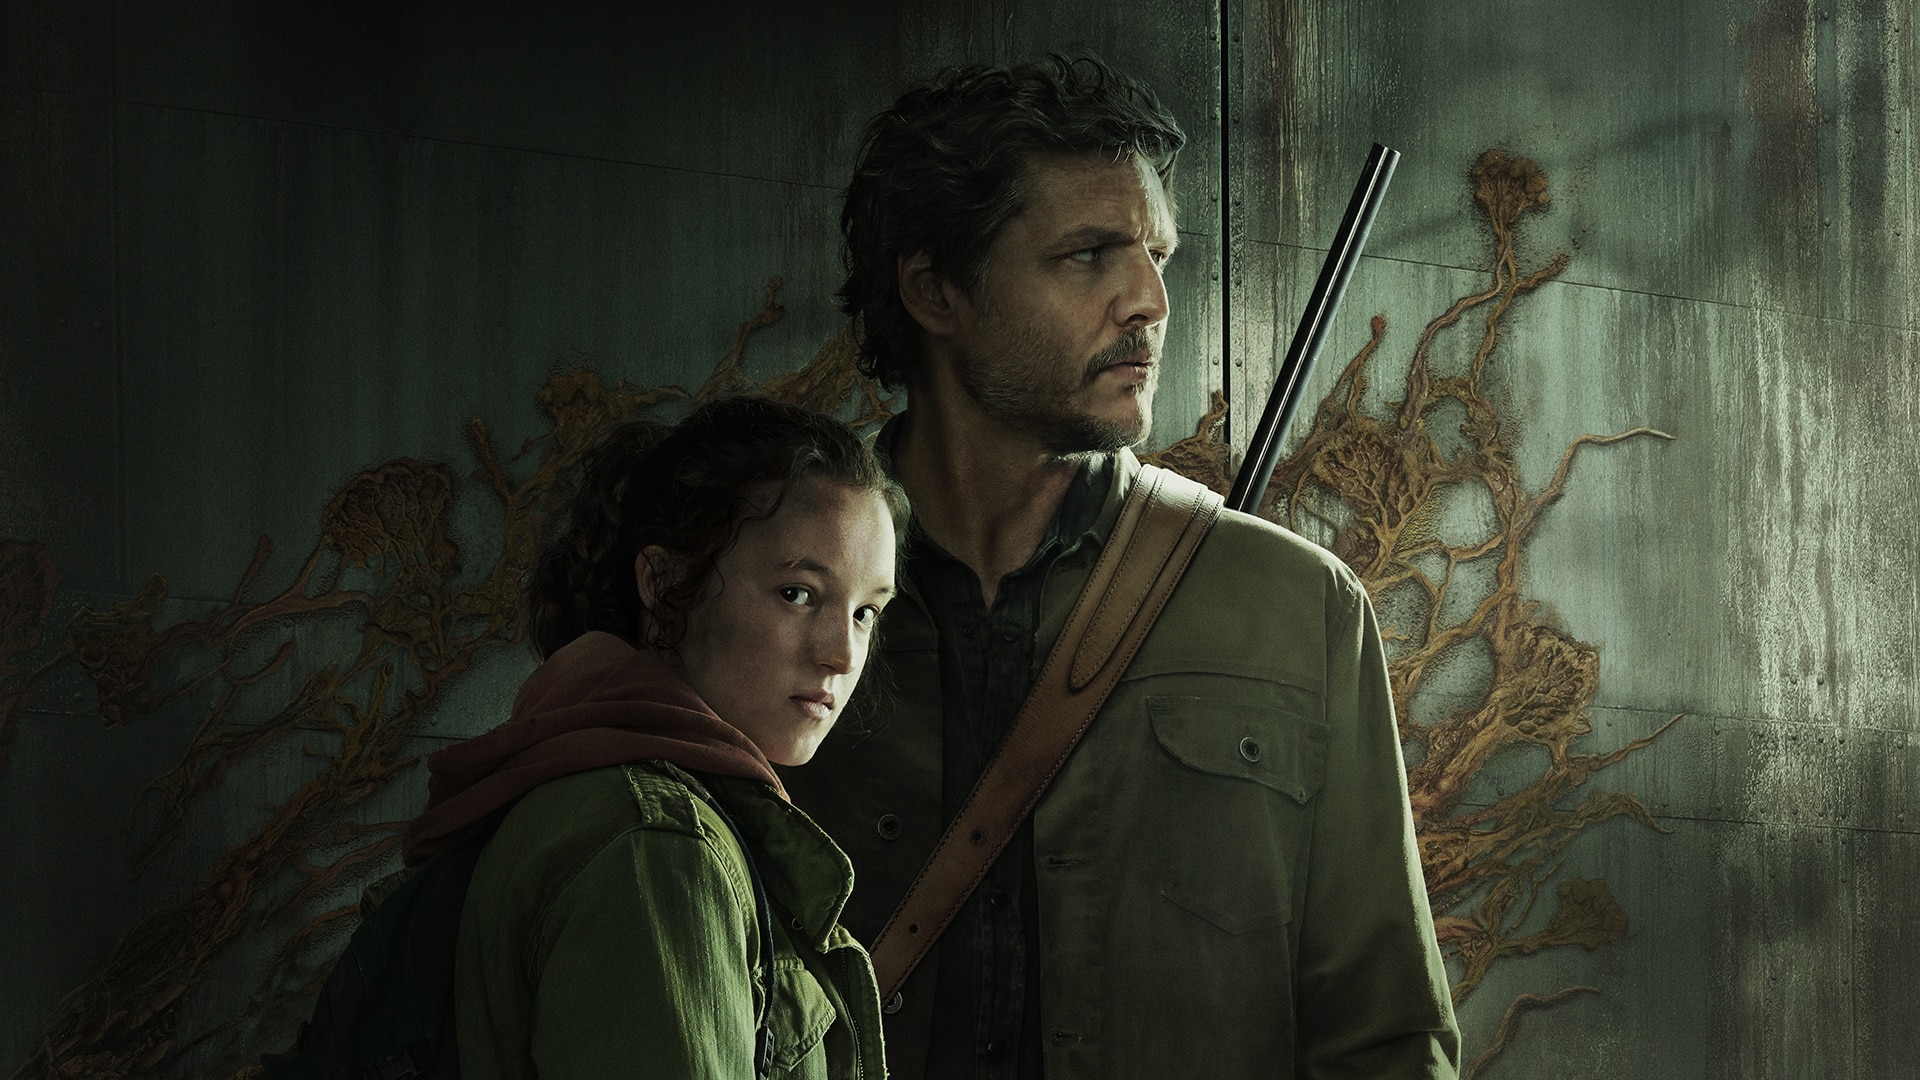 The Last of Us on HBO Max: Episode 8 is a Gripping Tale of